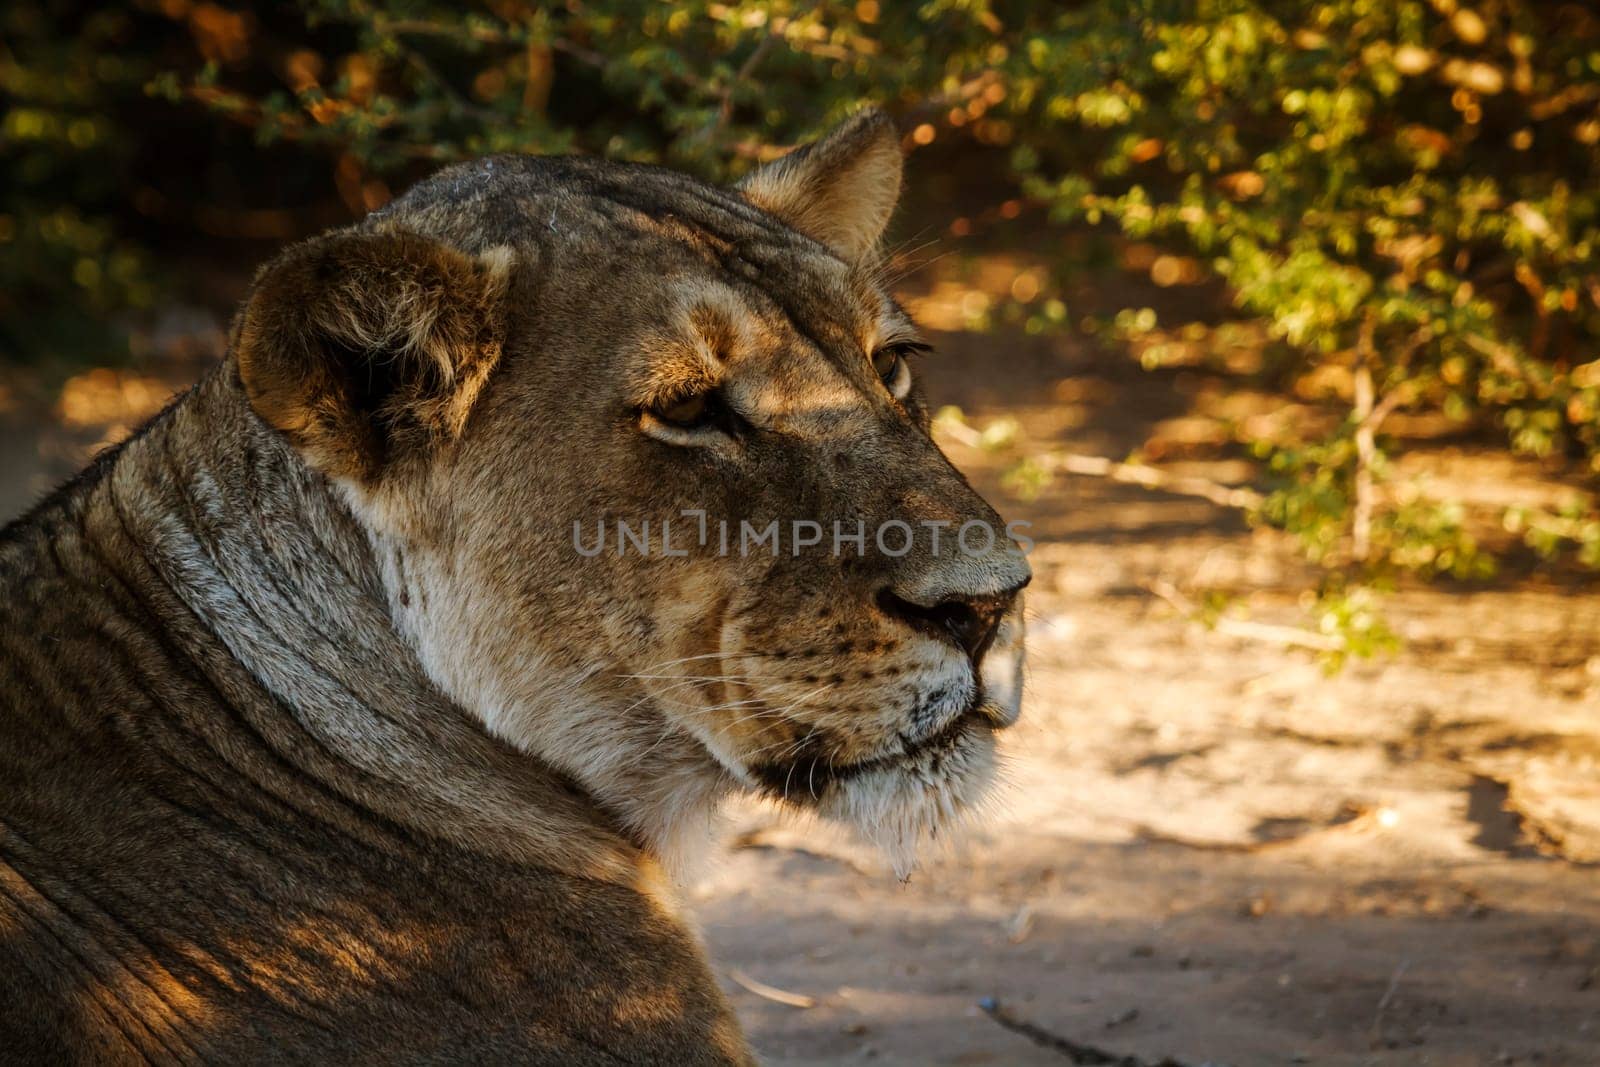 African lion in Kgalagadi transfrontier park, South Africa by PACOCOMO